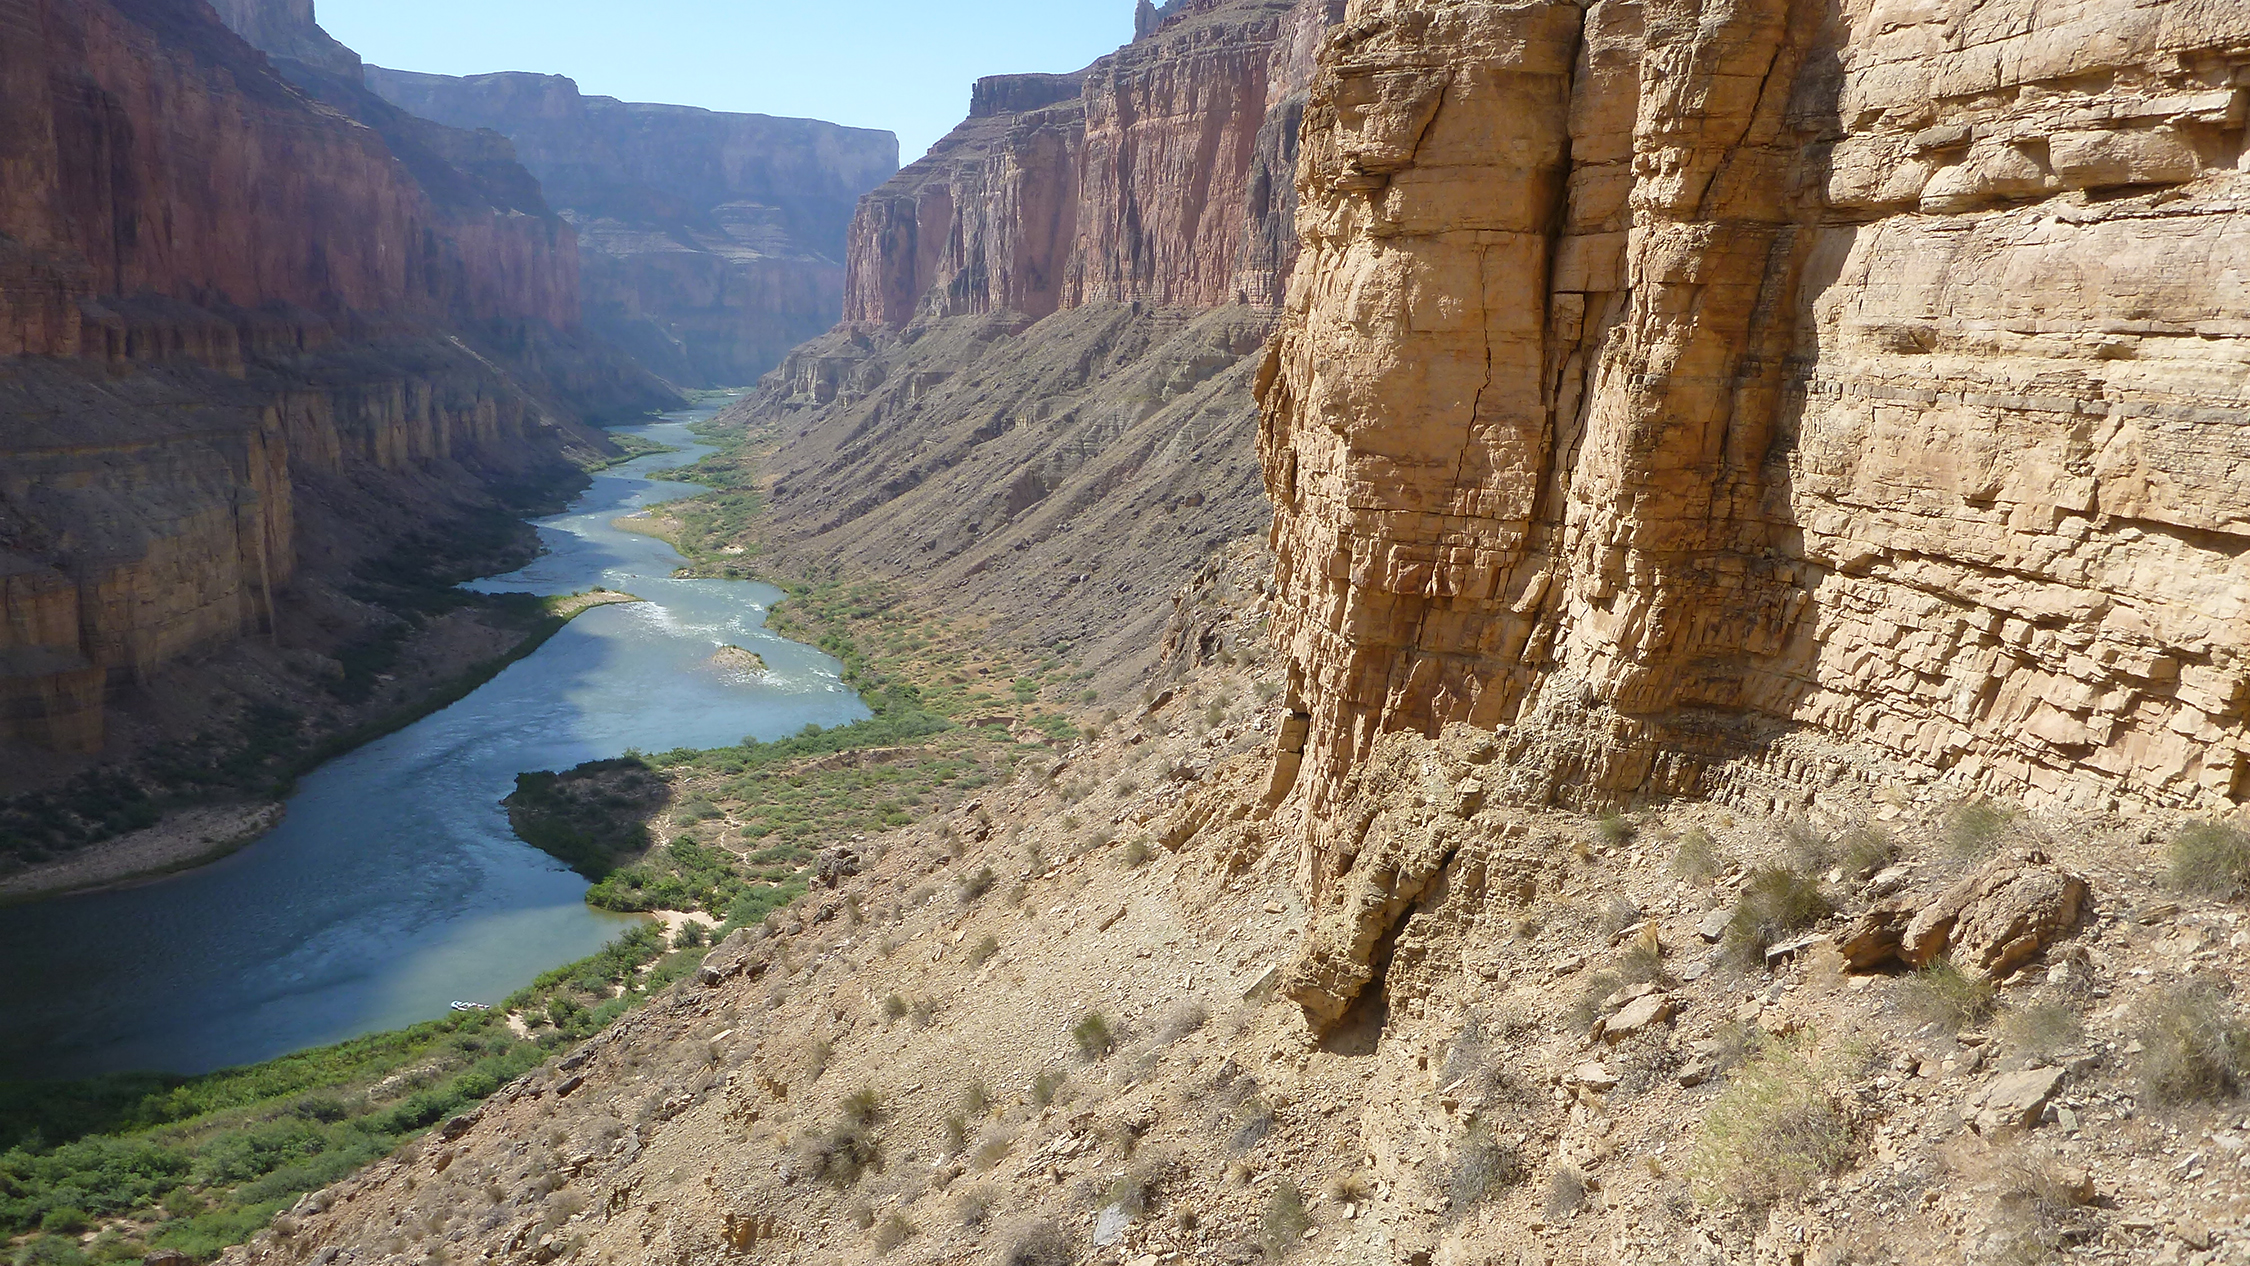 The view from the trail that leads from the Colorado River to the Nankoweap Granaries is not soon forgotten.